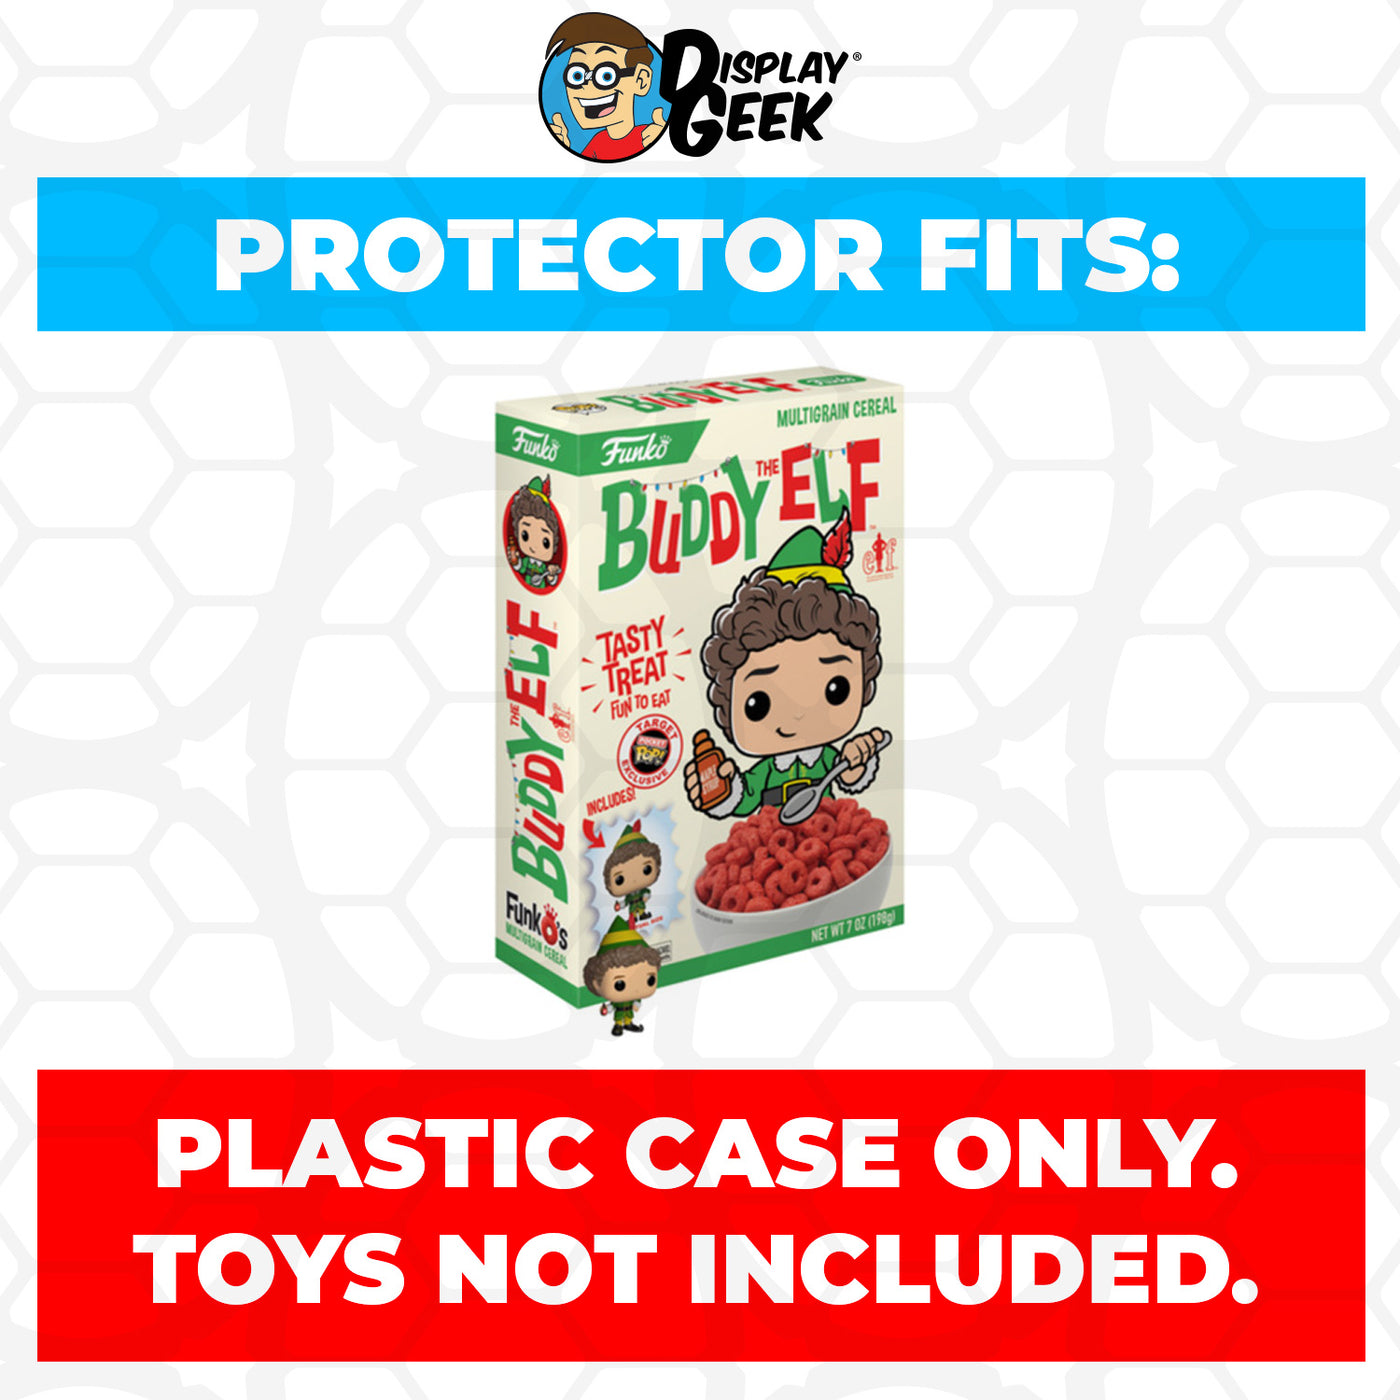 Pop Protector for Buddy the Elf FunkO's Cereal Box on The Protector Guide App by Display Geek